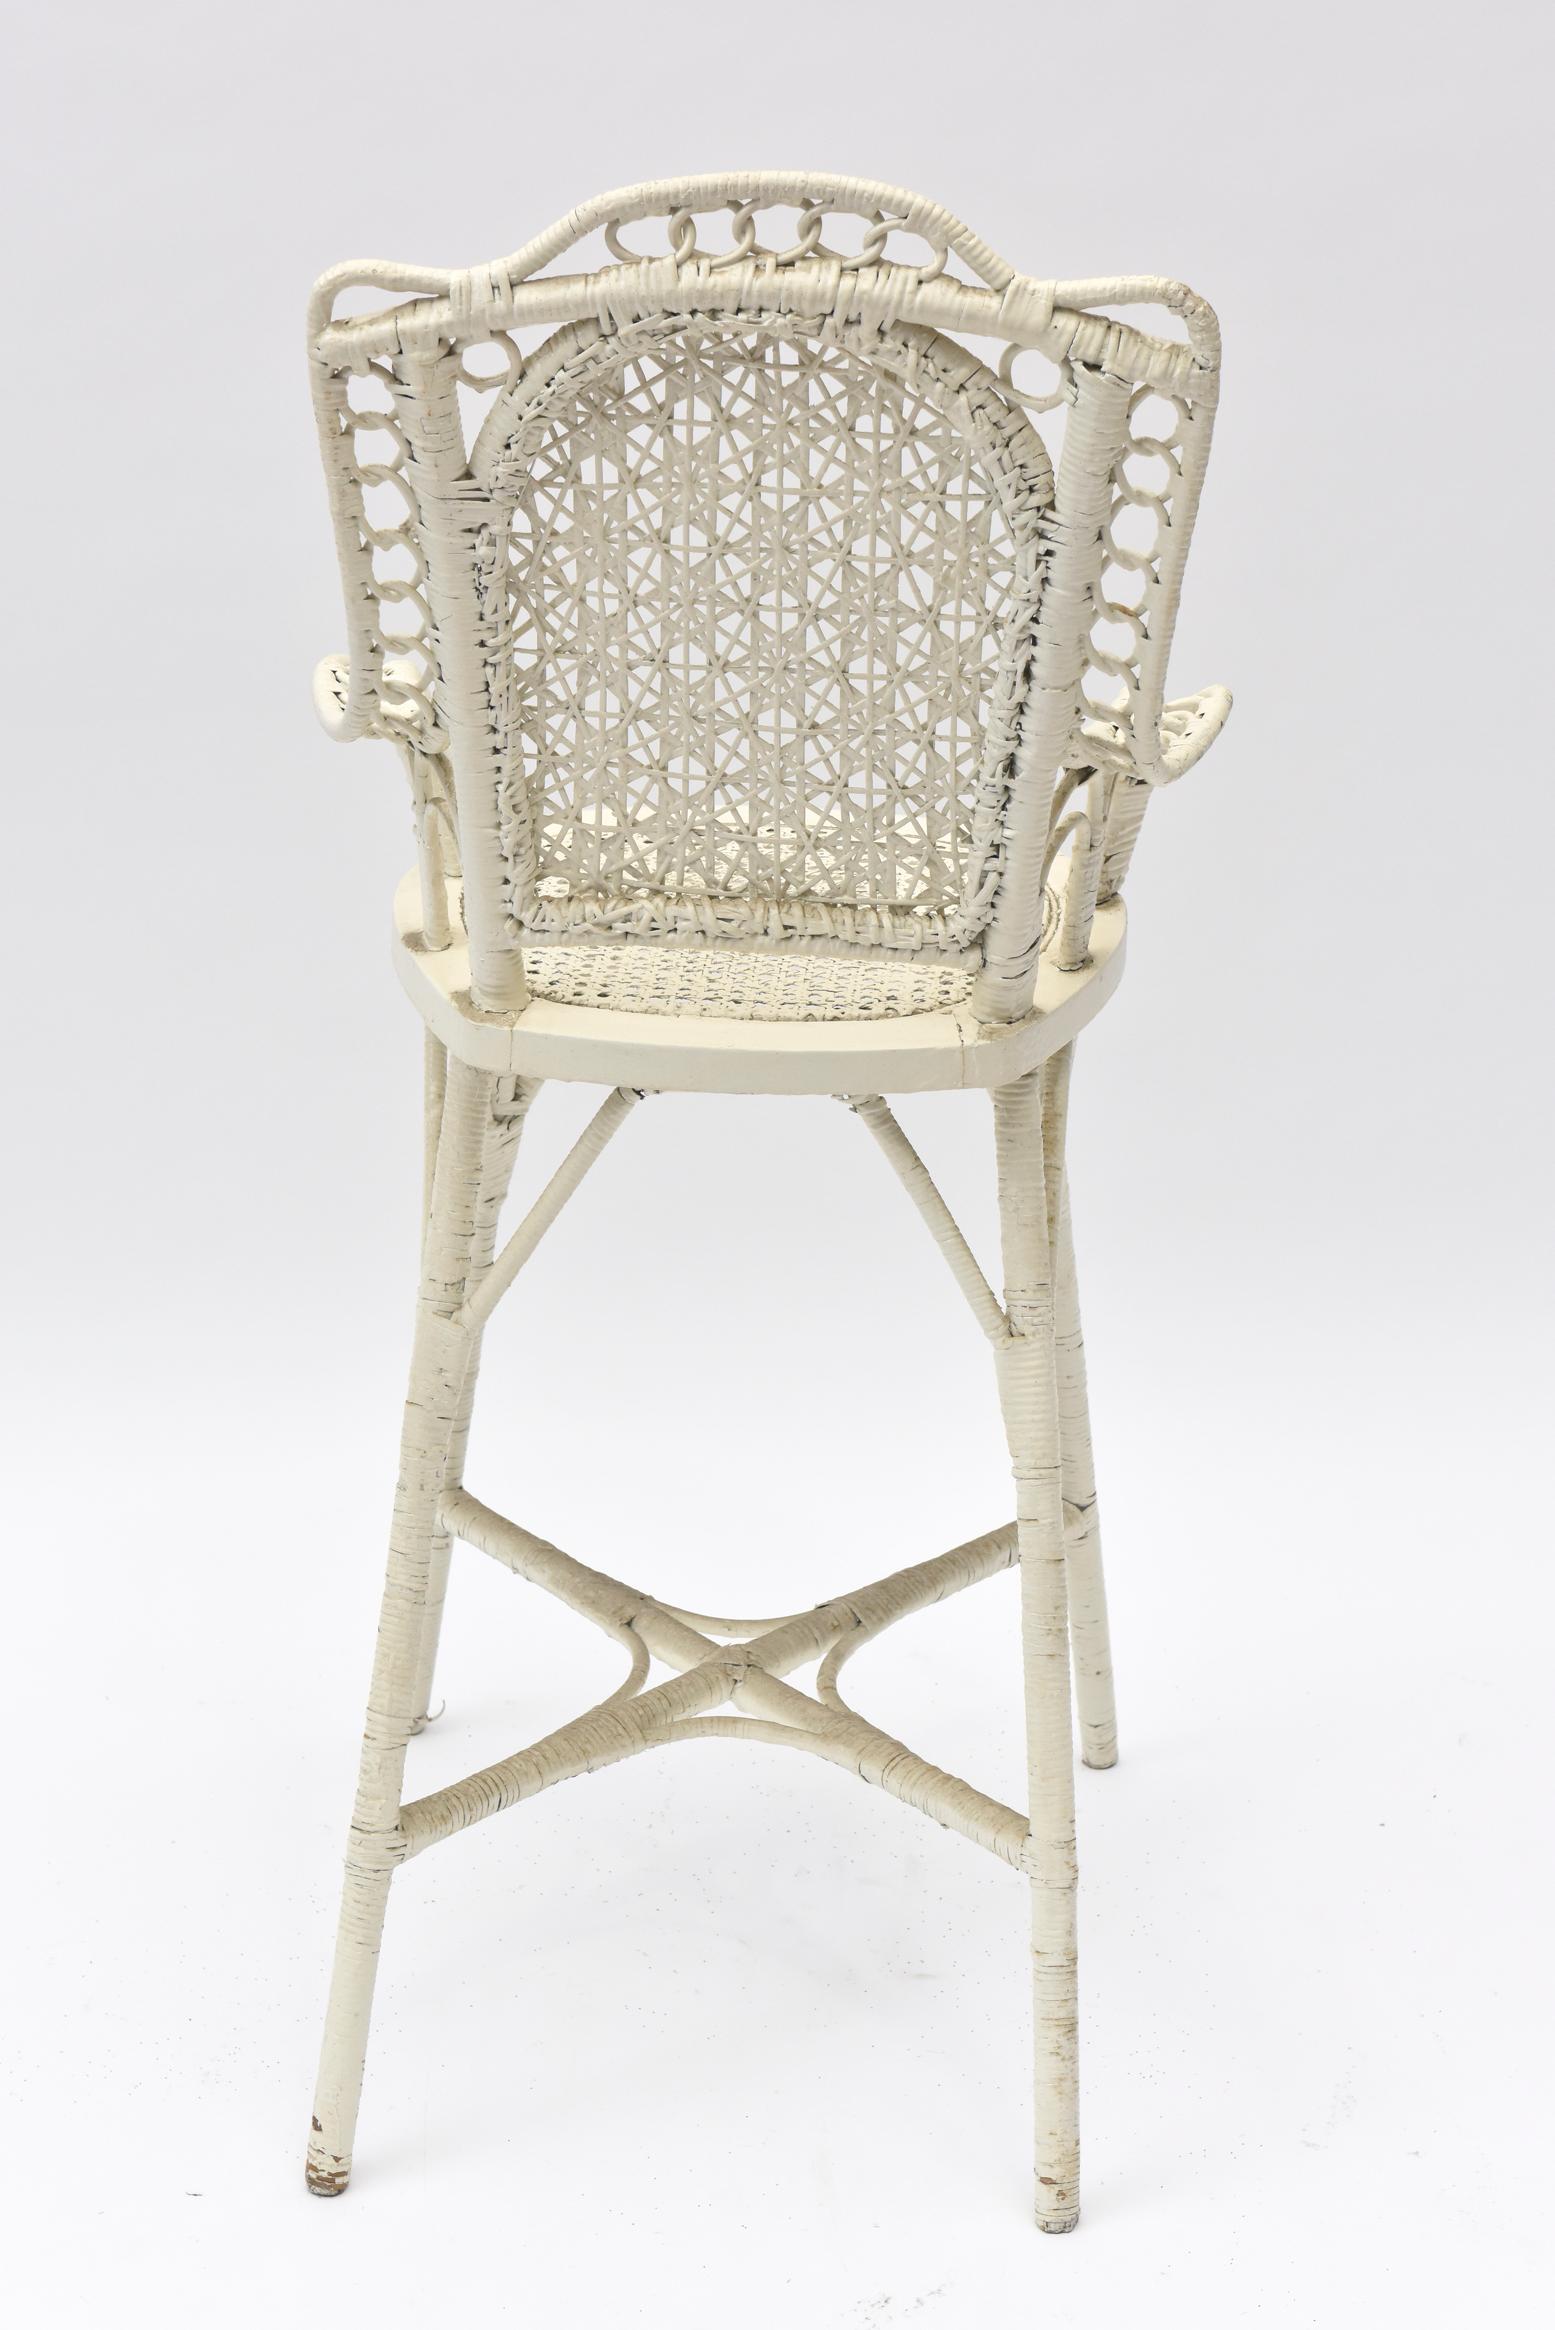 American Incredibly Rare Childs Ornate Victorian Youth High Chair with Spider Woven Back For Sale